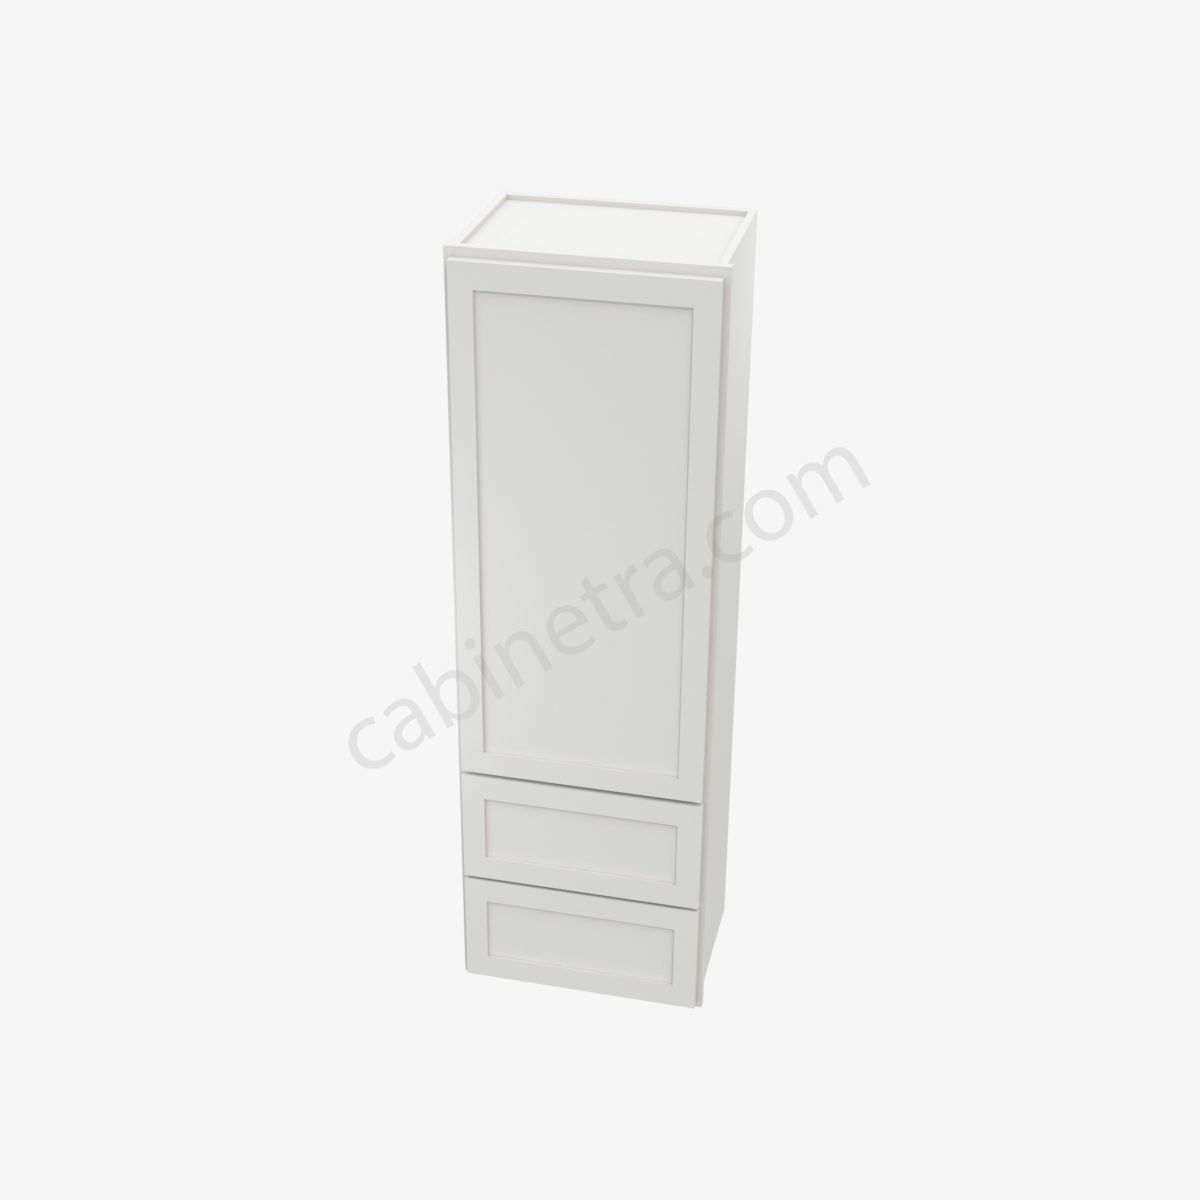 AW W2D1860 3 Forevermark Ice White Shaker Cabinetra scaled